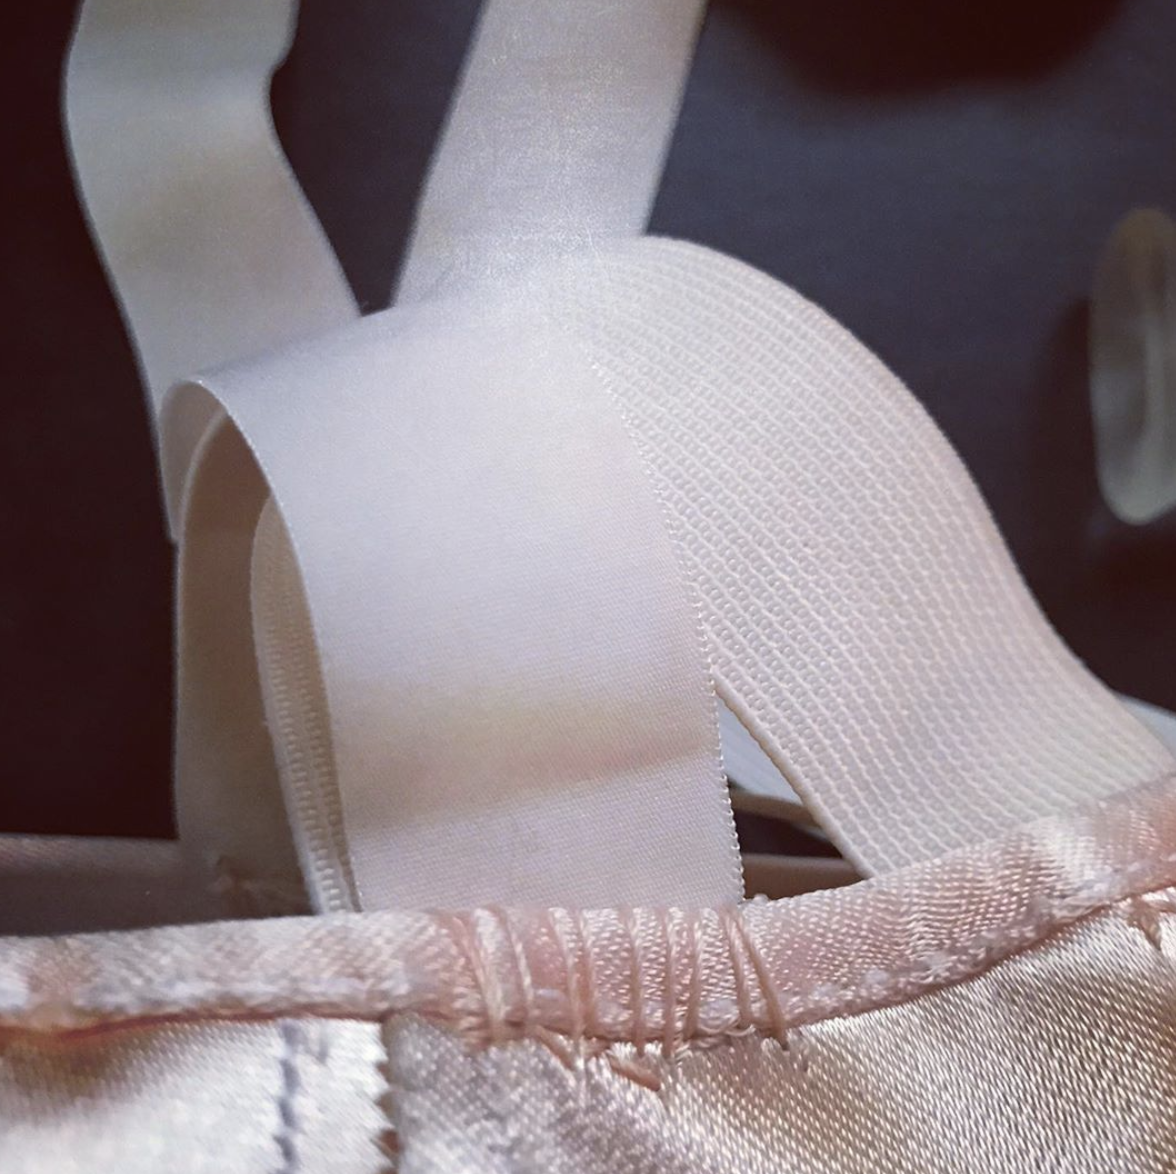 sewing pointe shoes — News — The Station: Dancewear and Studios Kalamazoo